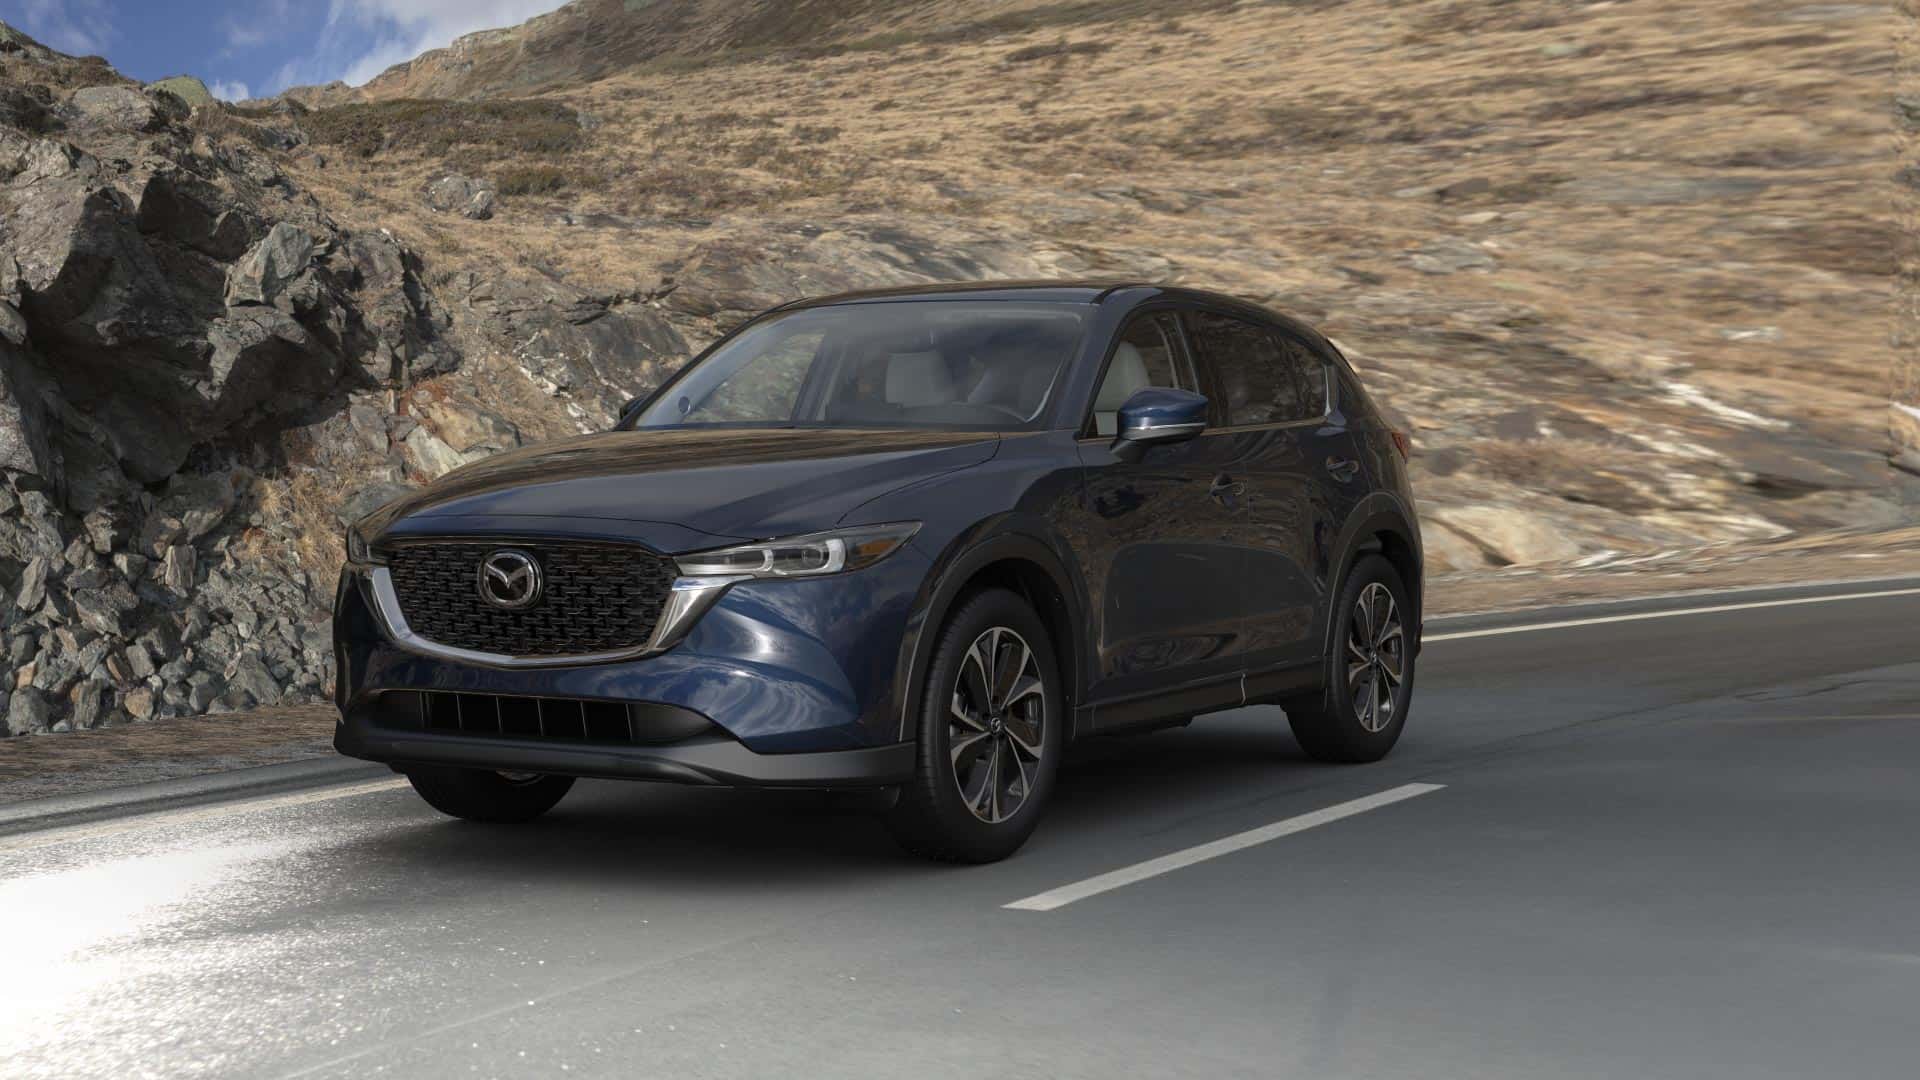 2023 Mazda CX-5 2.5 S Premium Plus Deep Crystal Blue Mica | Bommarito Mazda St. Peters in St. Peters MO